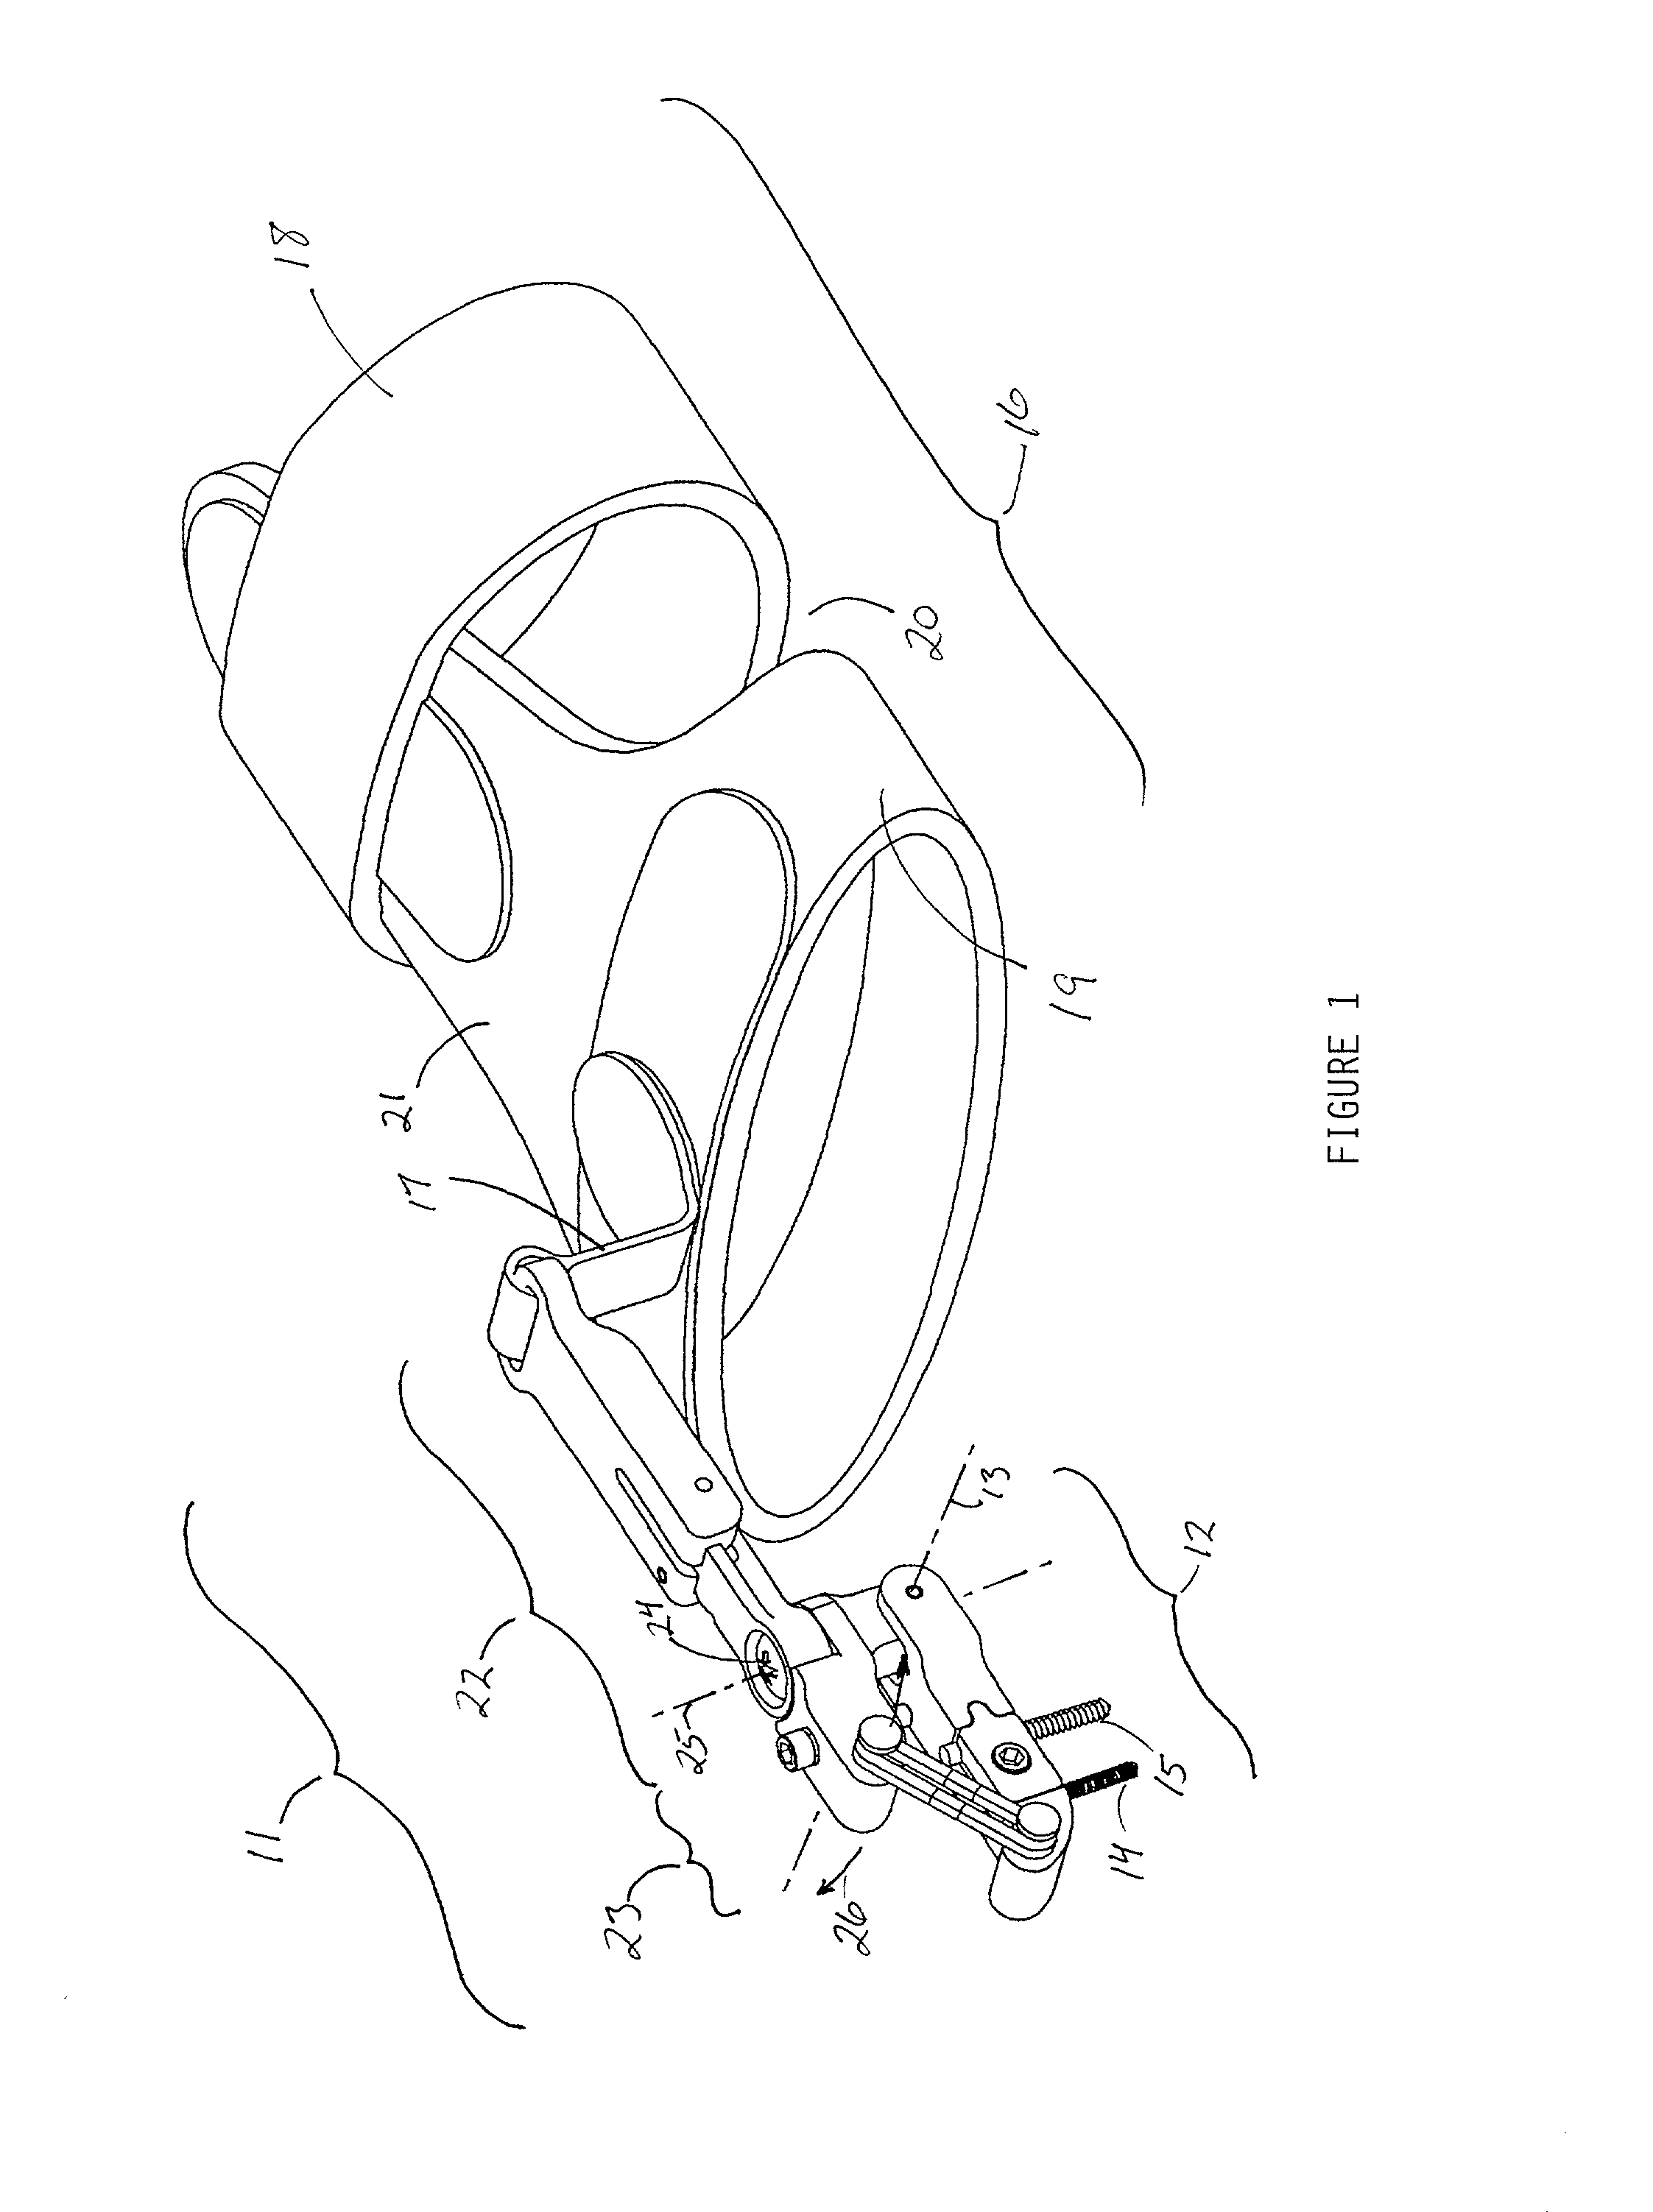 Medical device for correcting finger joint contractures